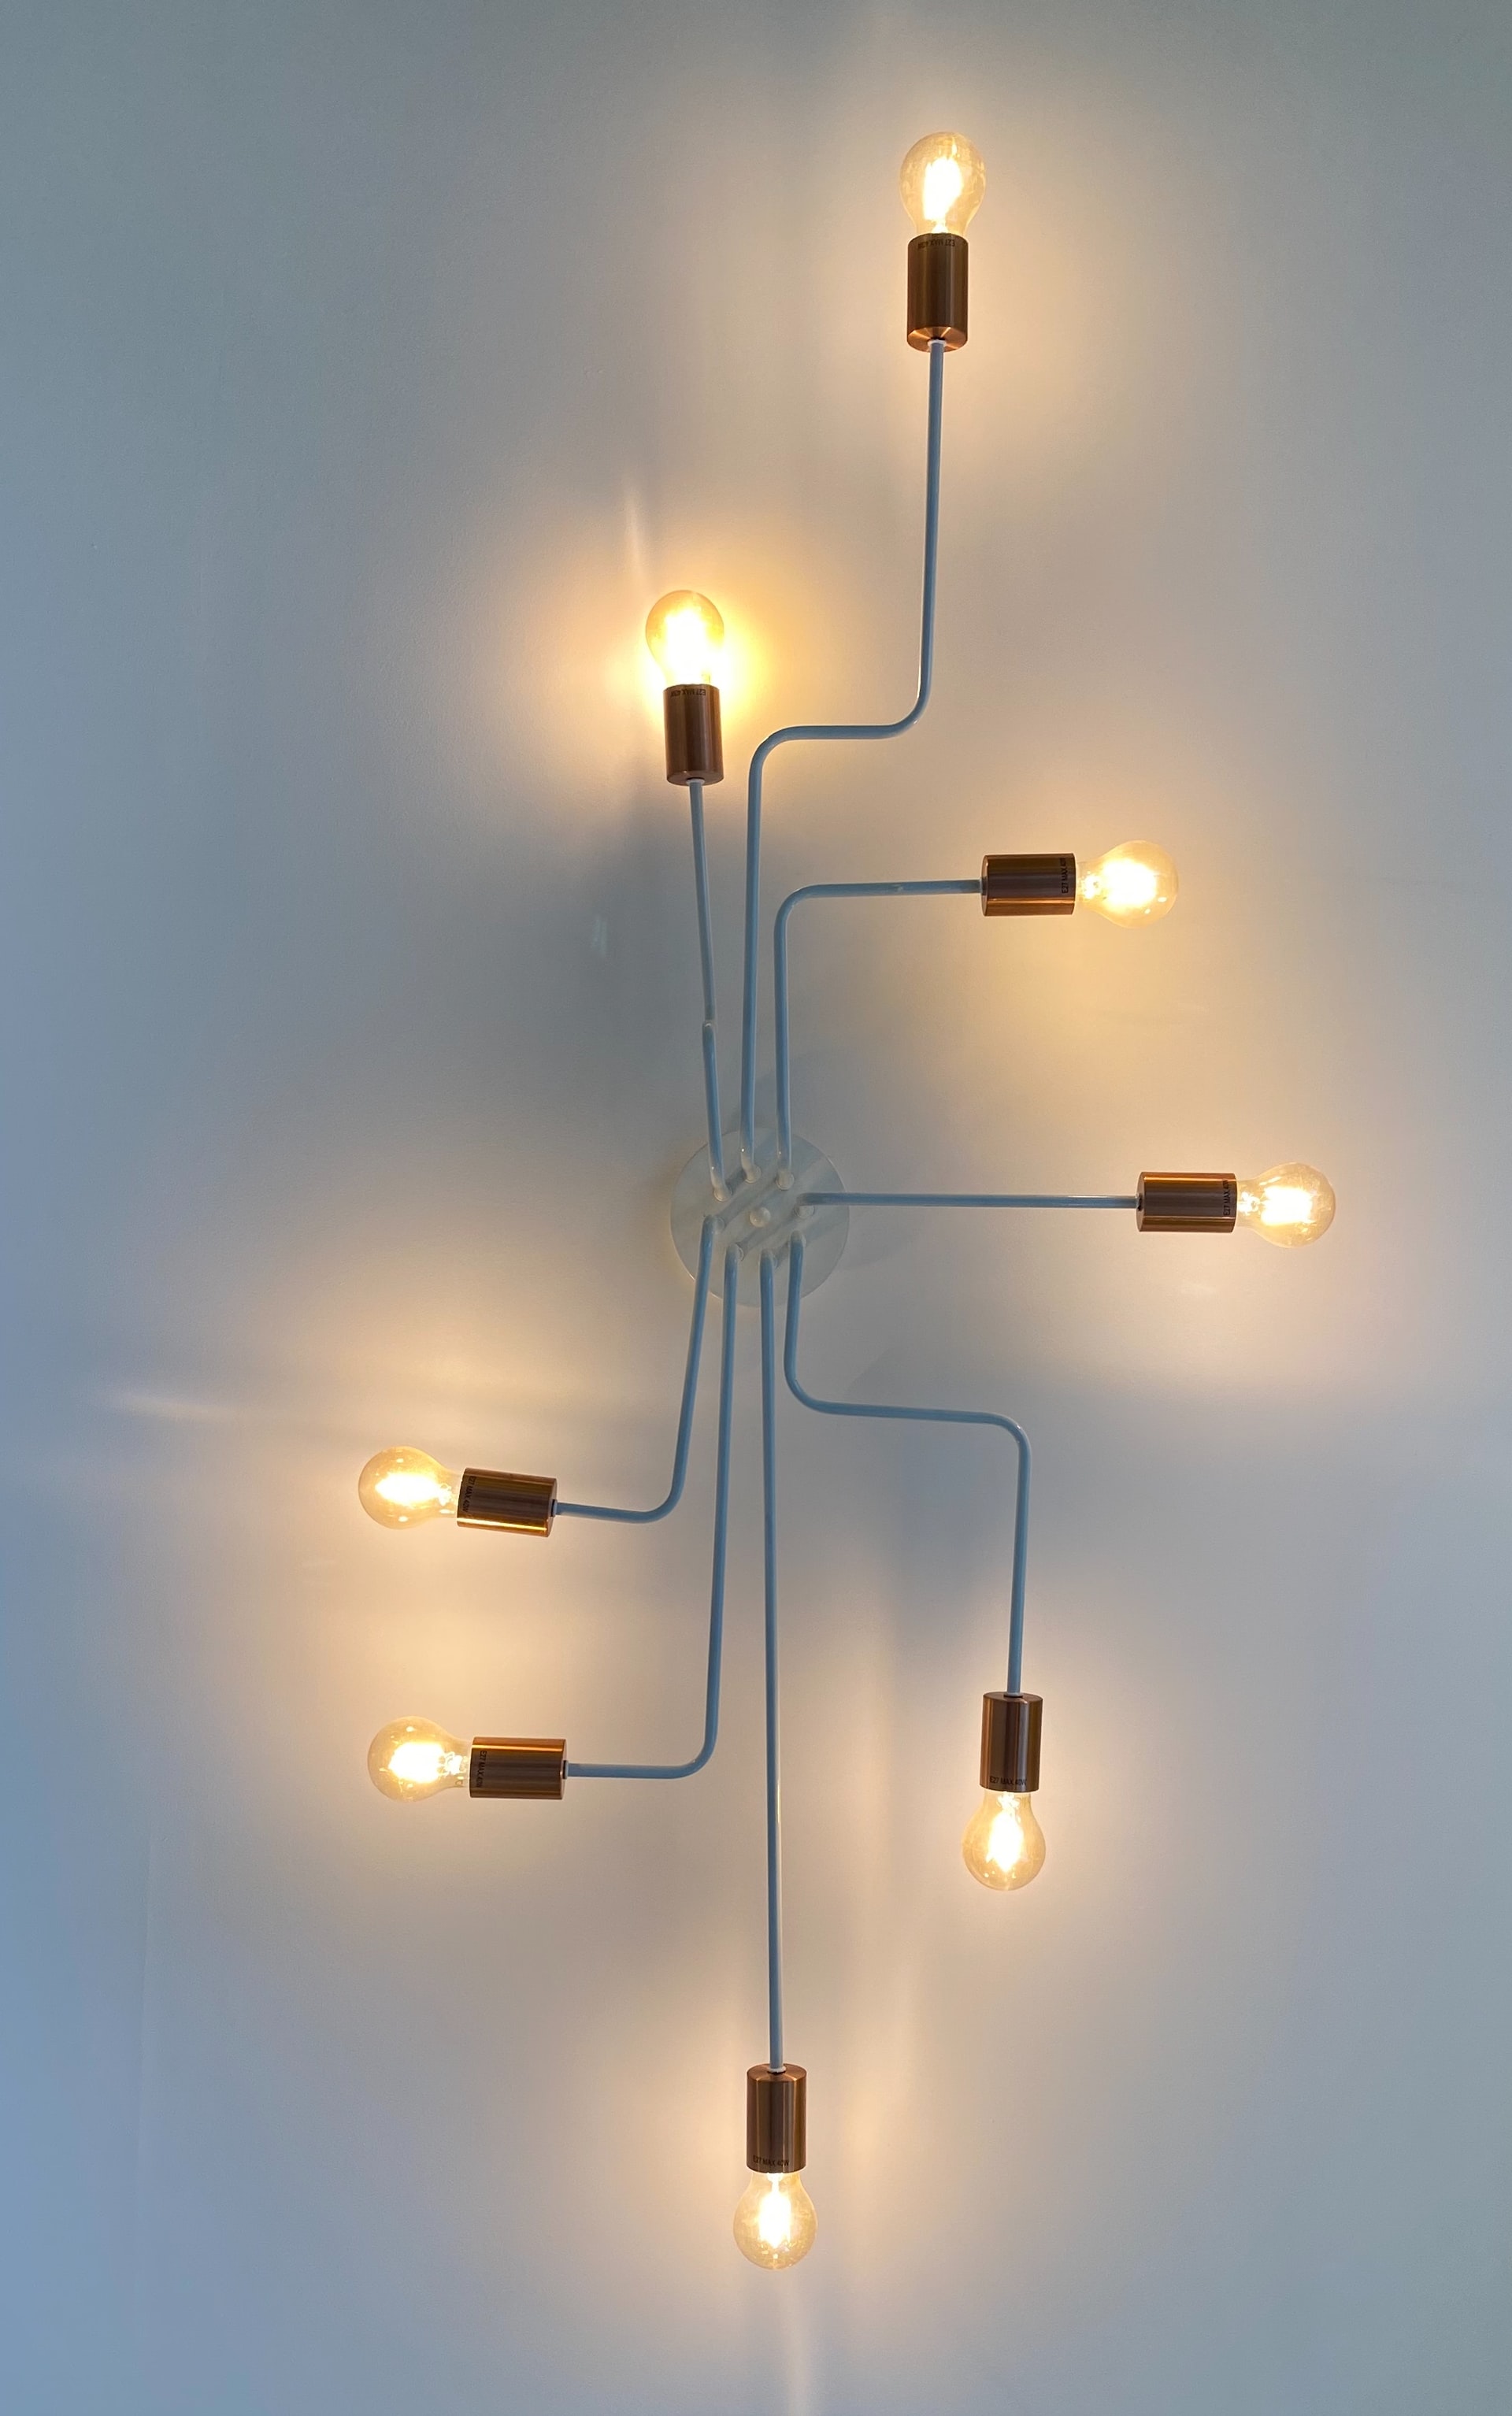 Ceiling light fixture with exposed light bulbs.